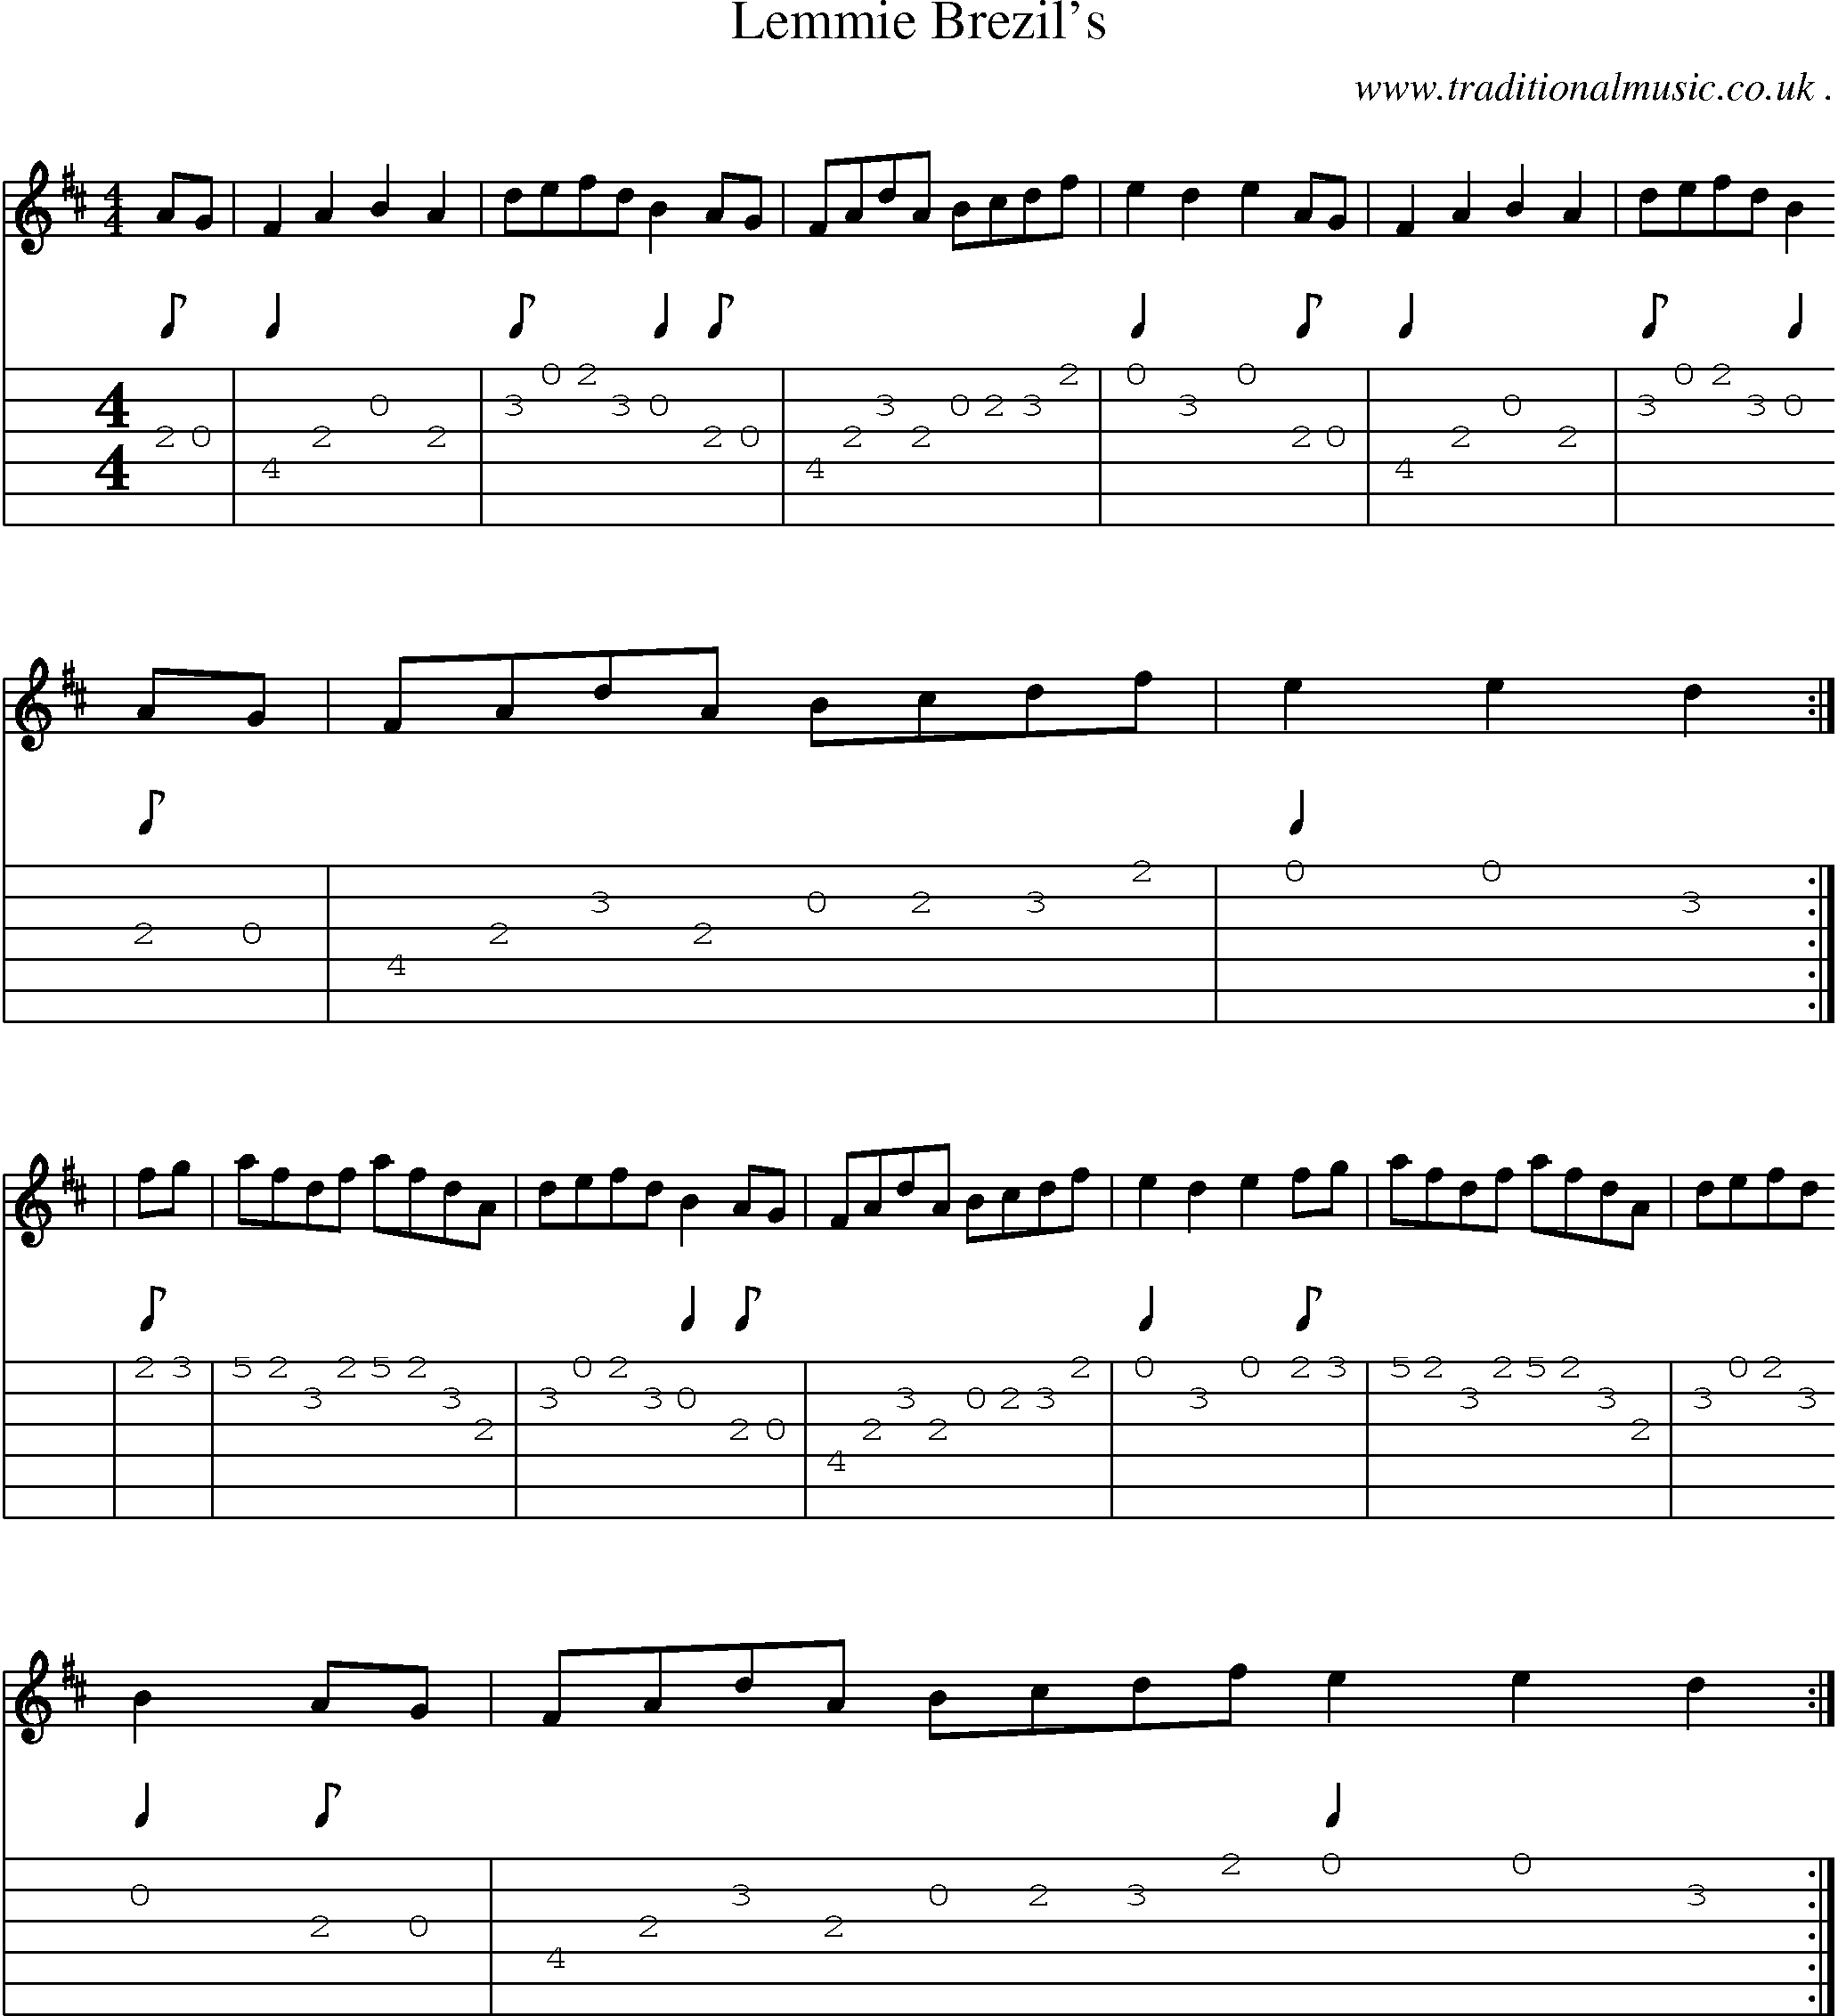 Sheet-Music and Guitar Tabs for Lemmie Brezils